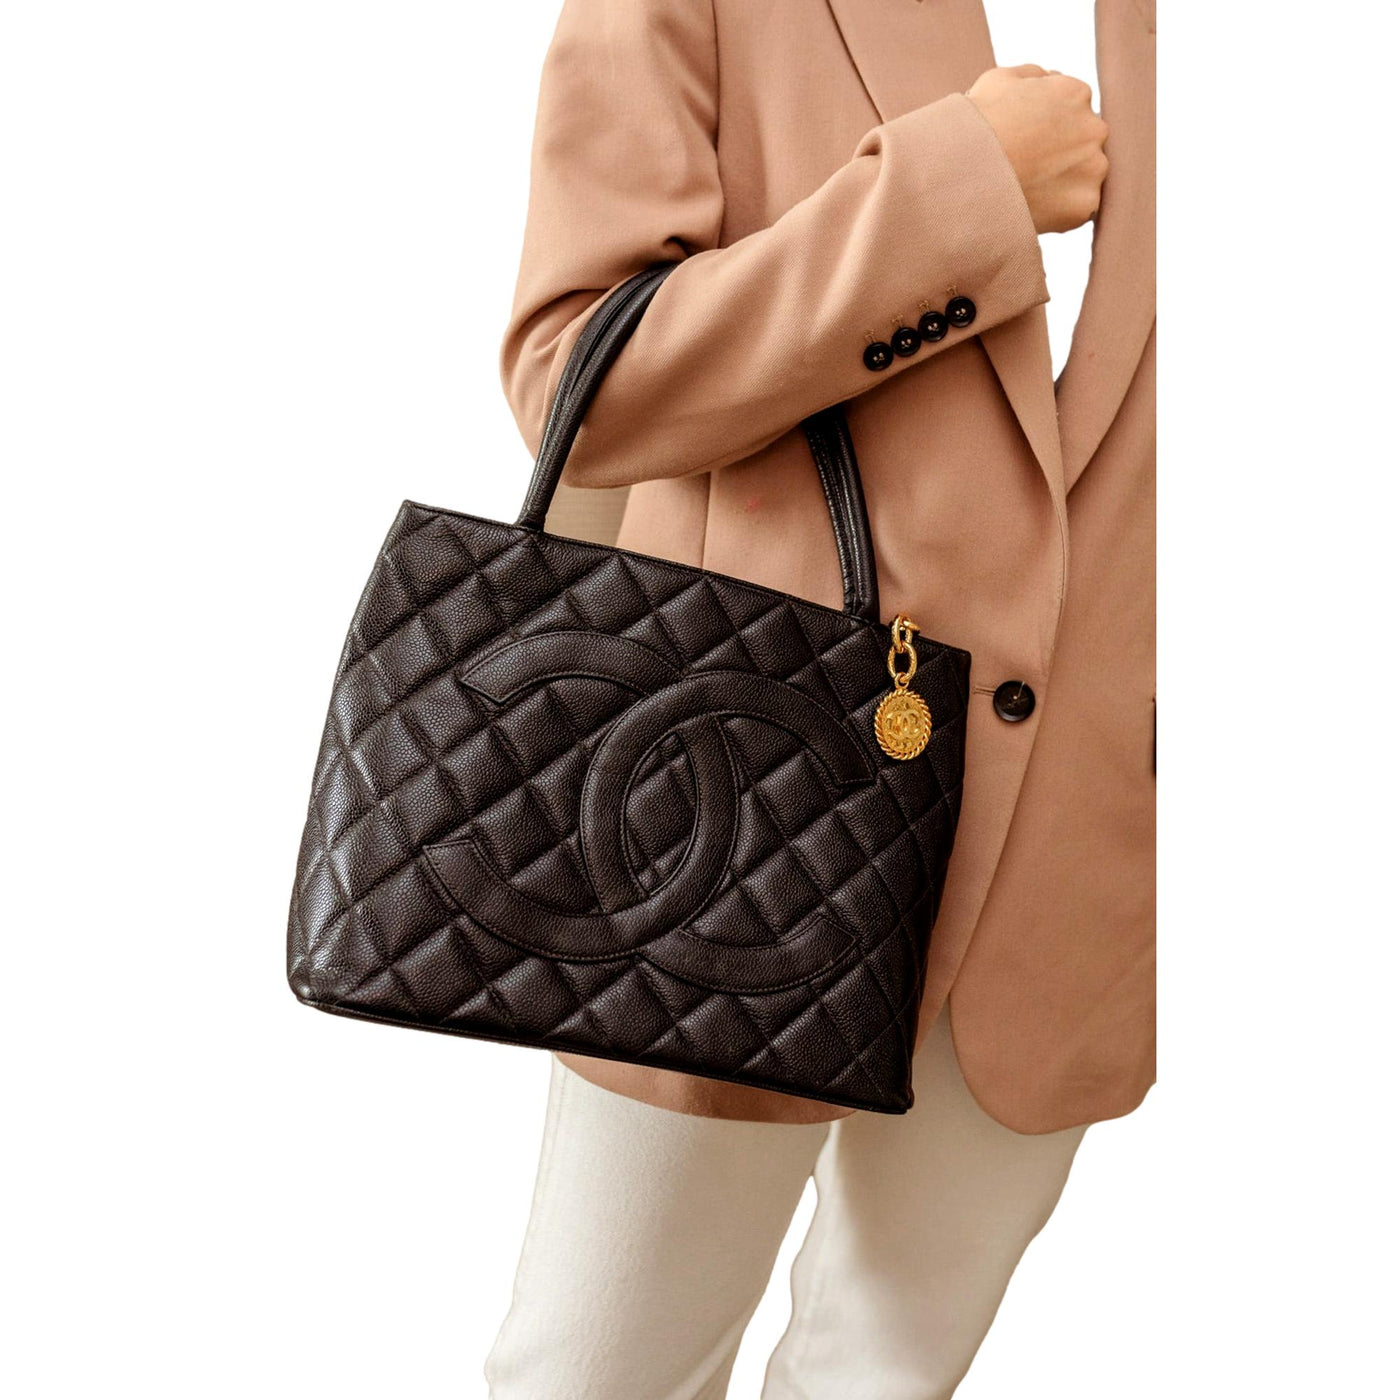 Chanel Medallion Black Caviar Quilted Leather Tote Bag - LUXURYMRKT